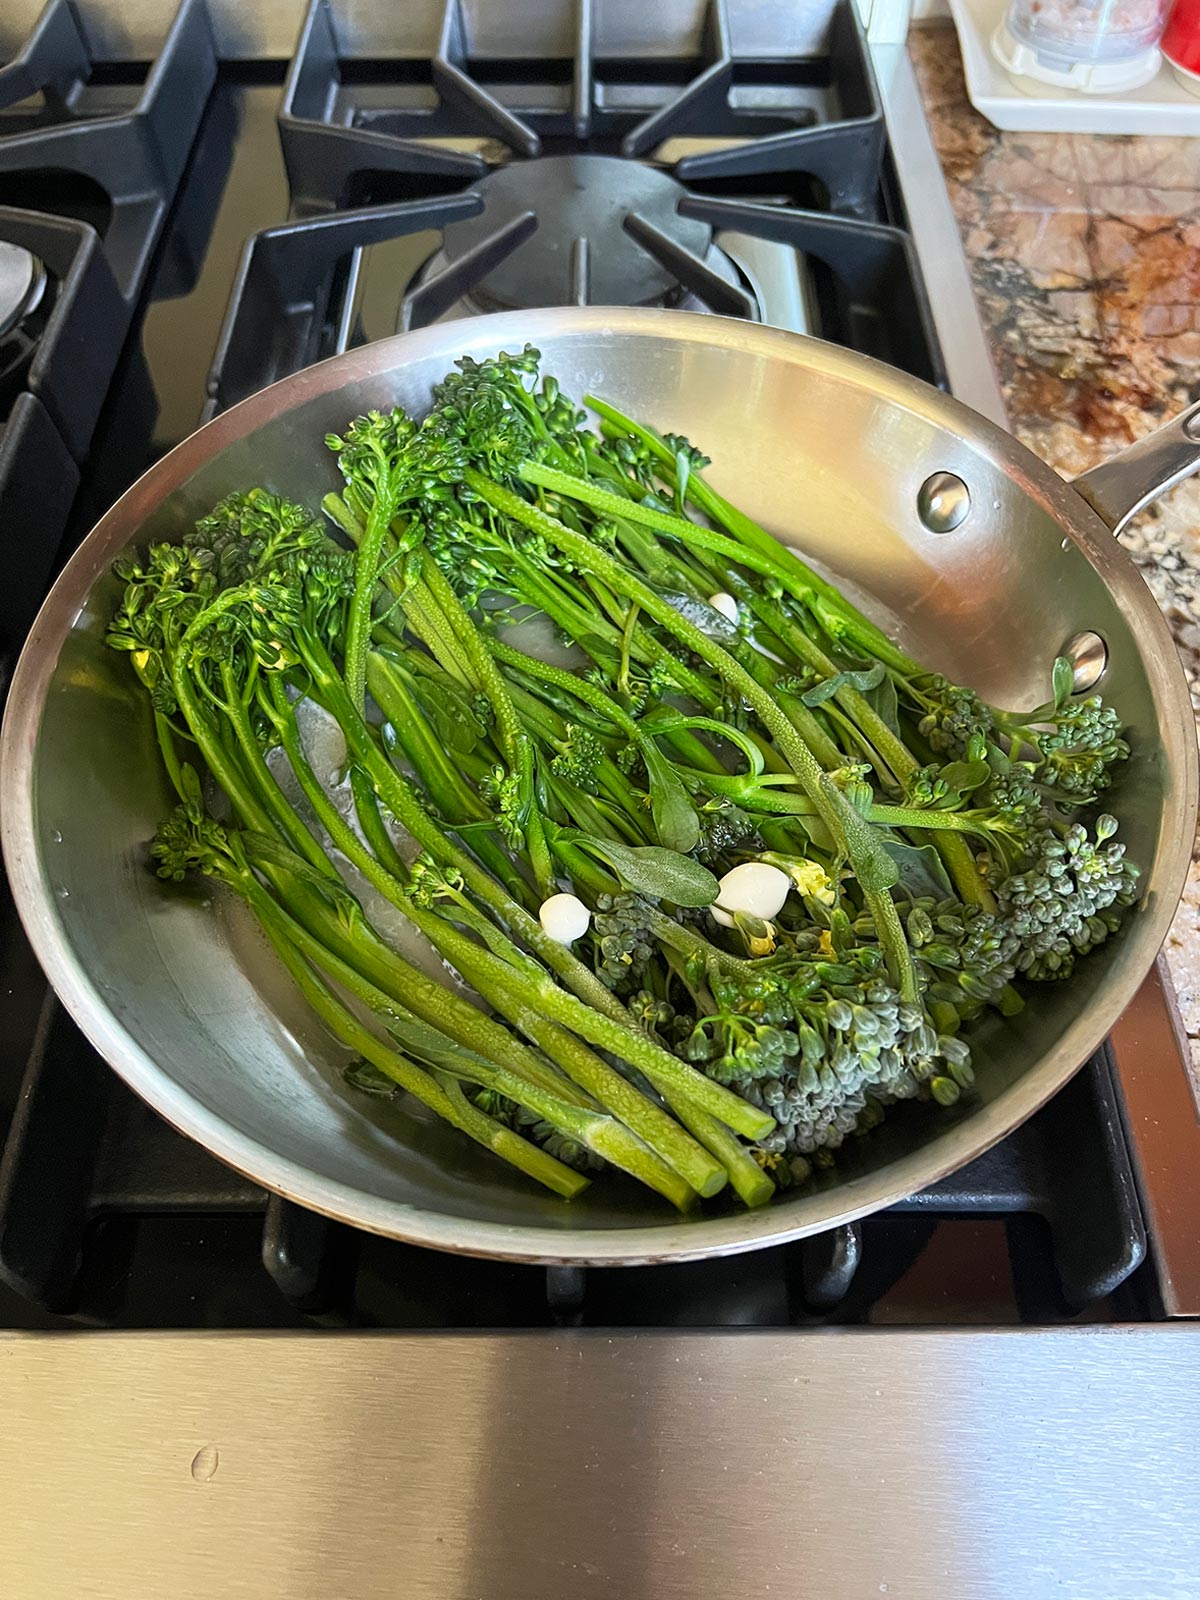 Baby broccoli cooked in pan with the cover off.